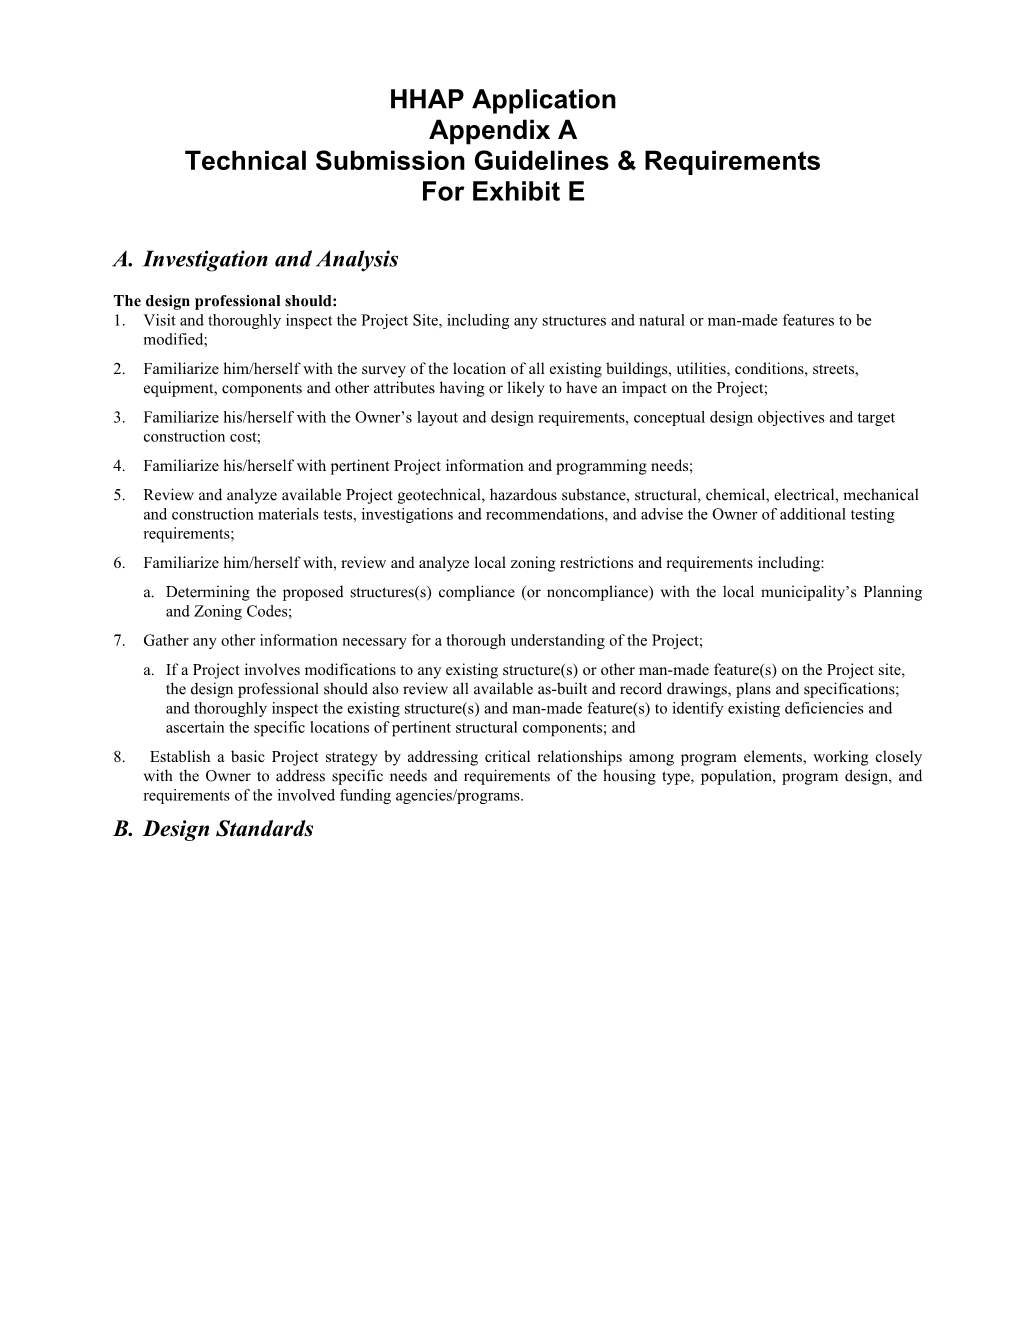 Technical Submission Guidelines & Requirements